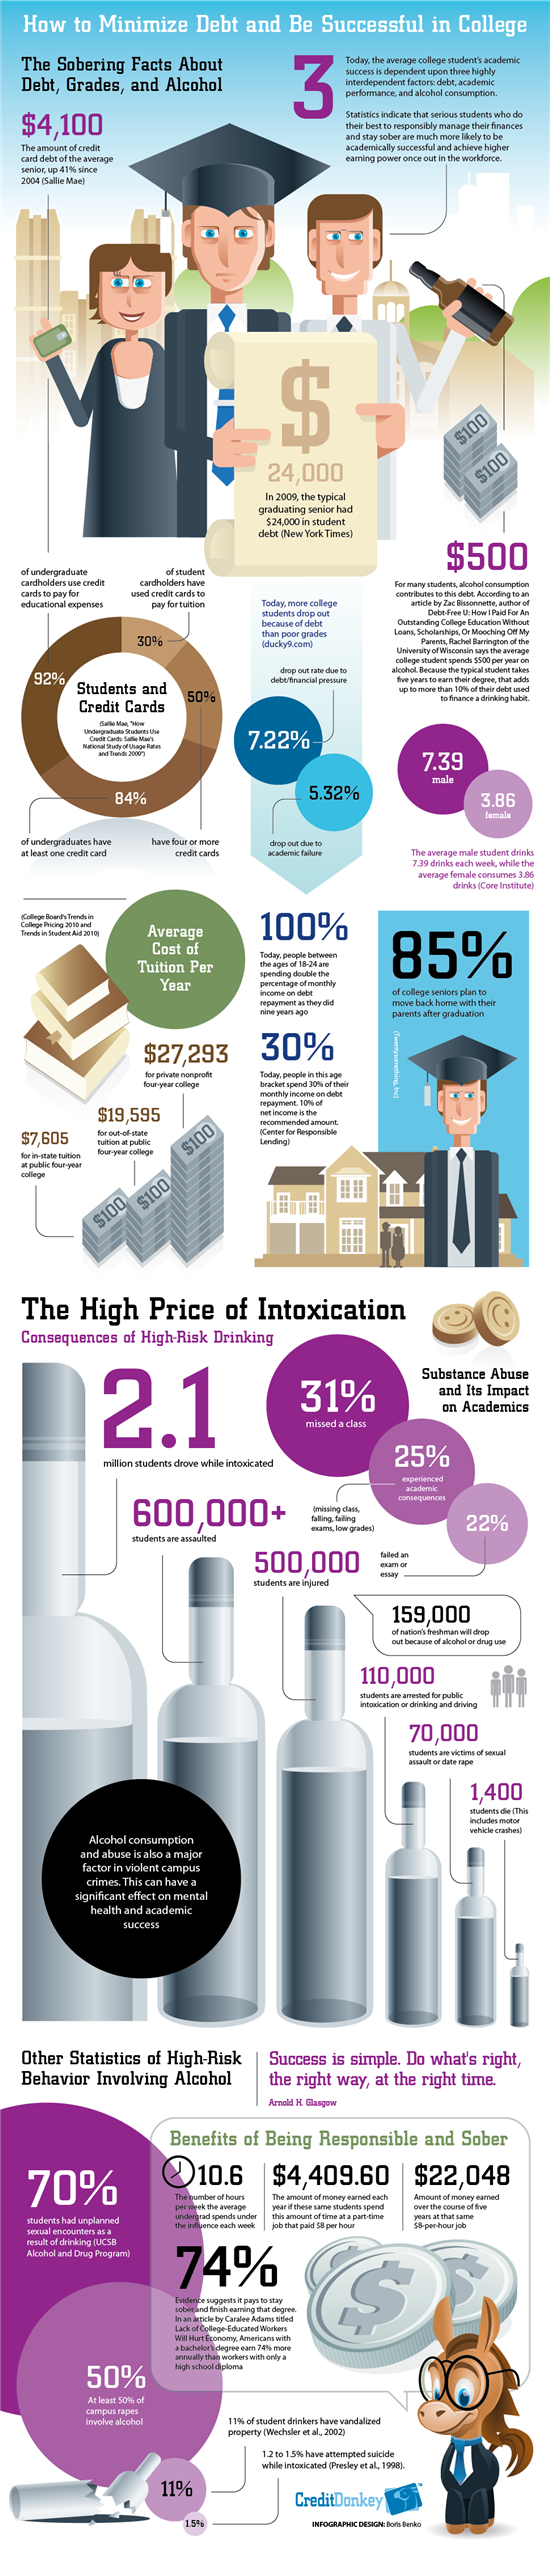 Infographics: College Debt, Grades, and Alcohol